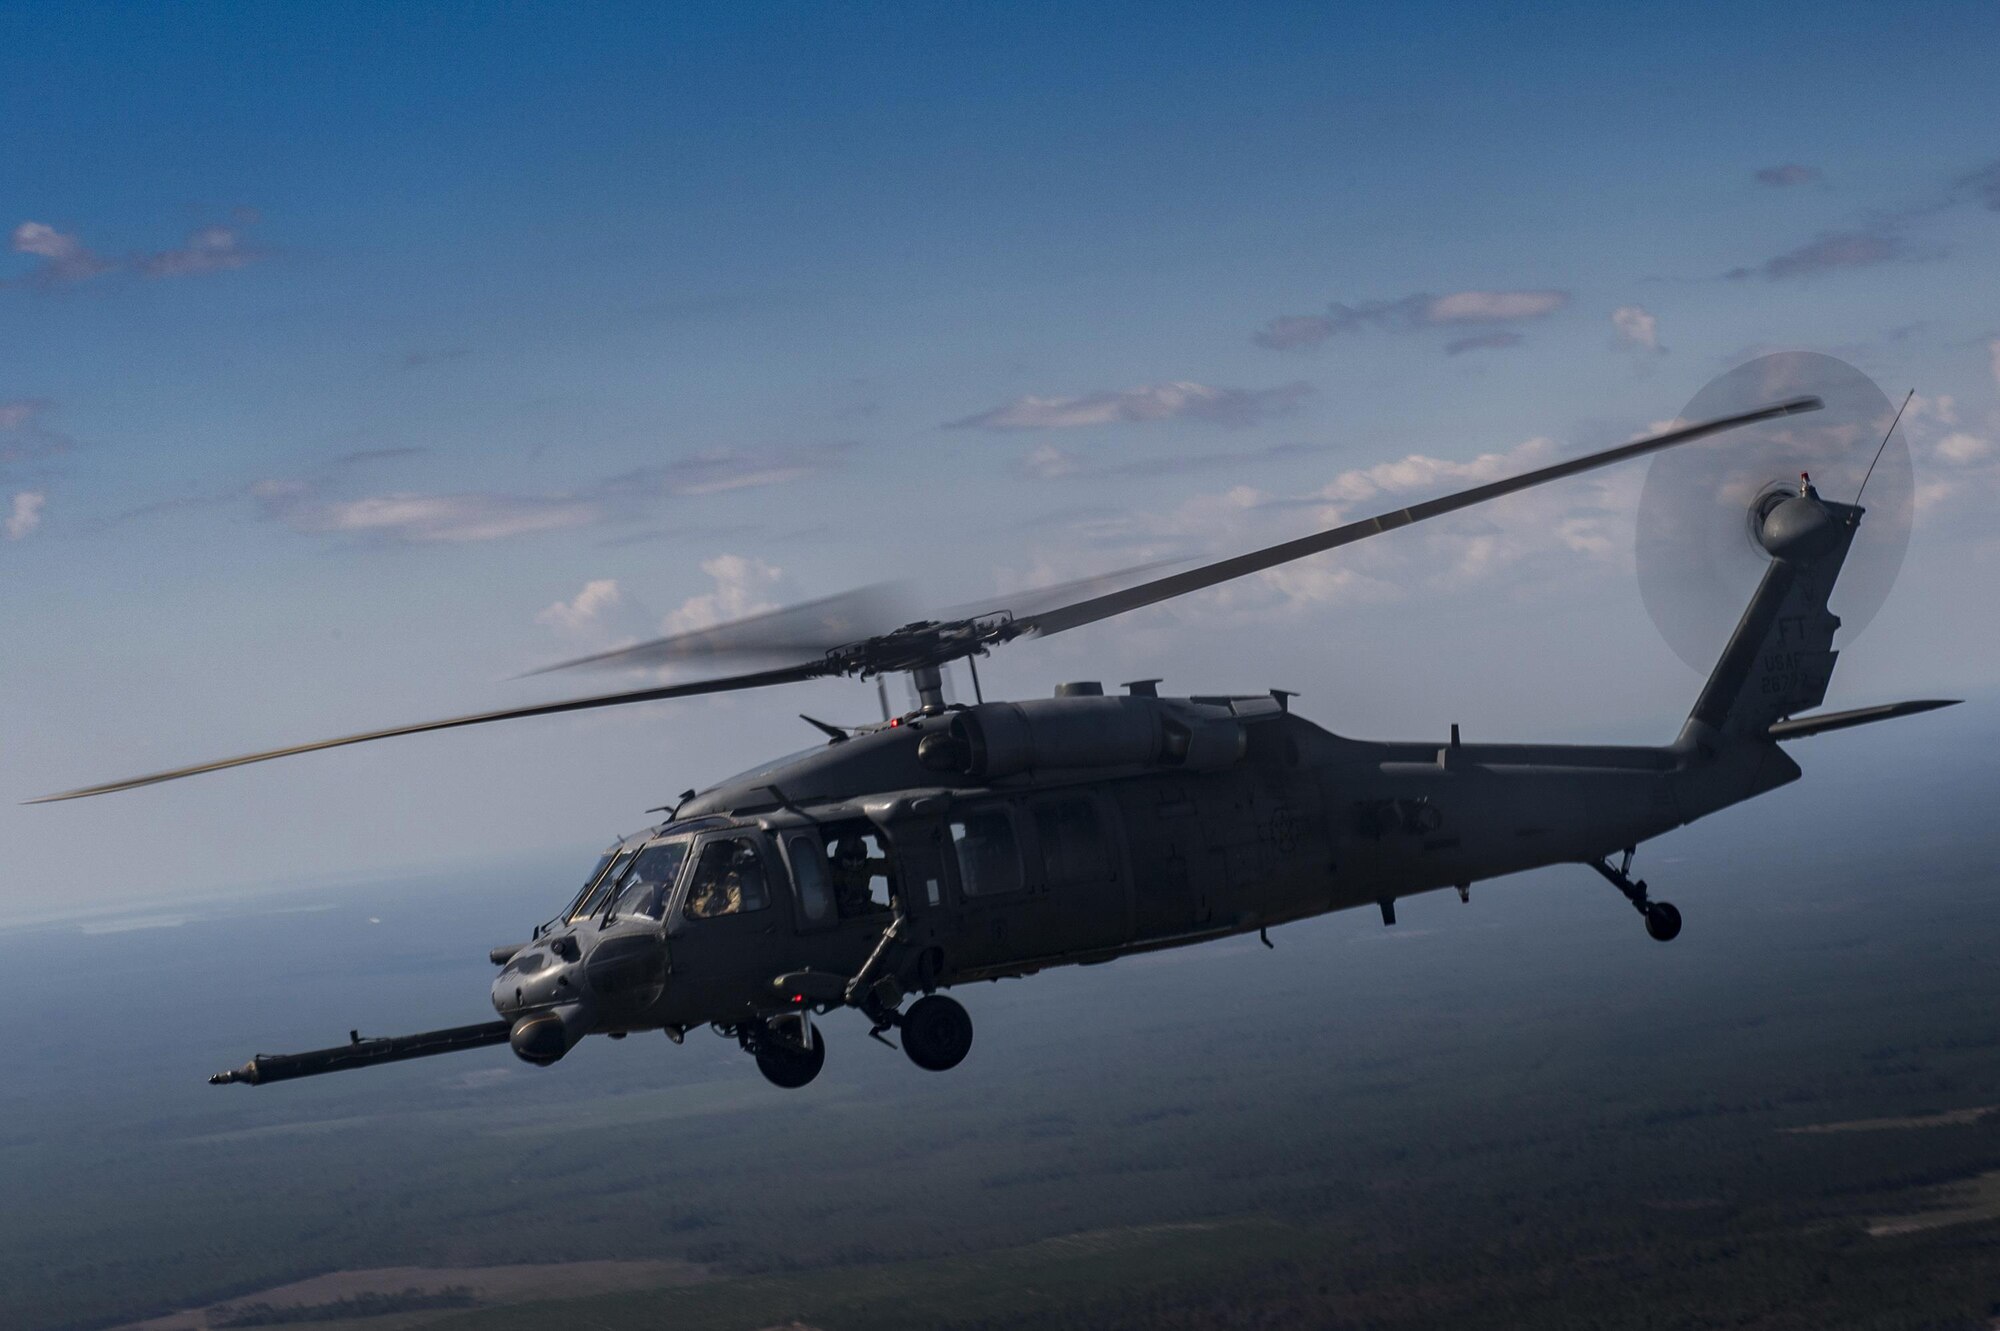 An HH-60G Pave Hawk from the 41st Rescue Squadron flies through the air during a rapid-rescue exercise, Nov. 3, 2016, near Tyndall Air Force Base, Fla. The exercise was designed to test the 347th Rescue Group’s ability to rapidly deploy, plan and execute rescue operations in combat environments. The exercise included HC-130J Combat King IIs, HH-60G Pave Hawks, C-17 Globemaster IIIs, A-10C Thunderbolt IIs, E-8C Joint Stars, pararescuemen and maintenance, intelligence and support personnel. (U.S. Air Force photo by Tech. Sgt. Zachary Wolf)